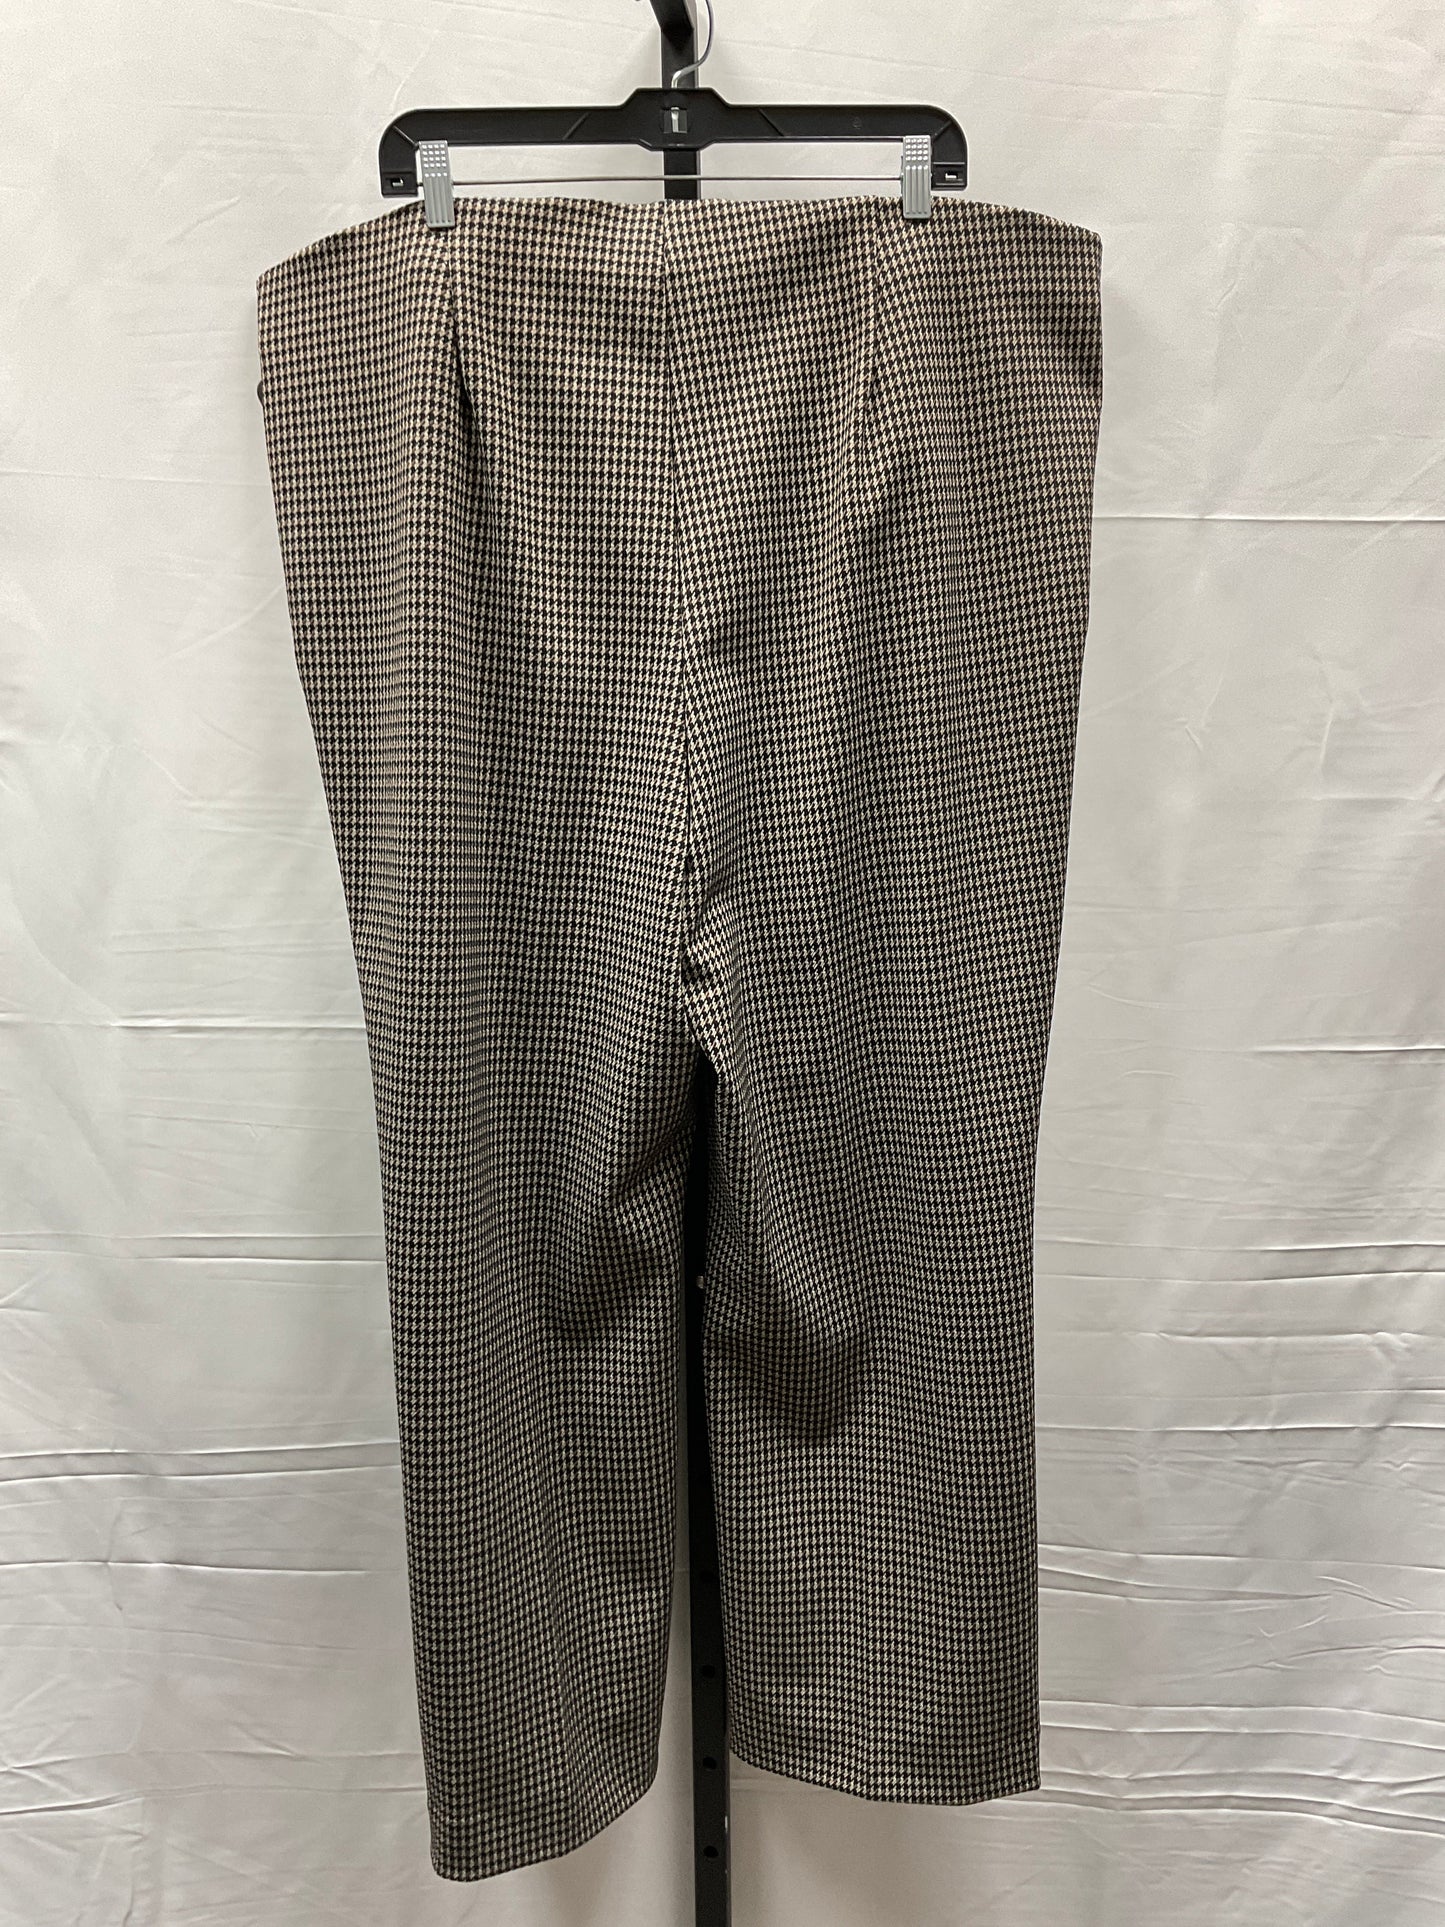 Pants Dress By Investments  Size: 2x